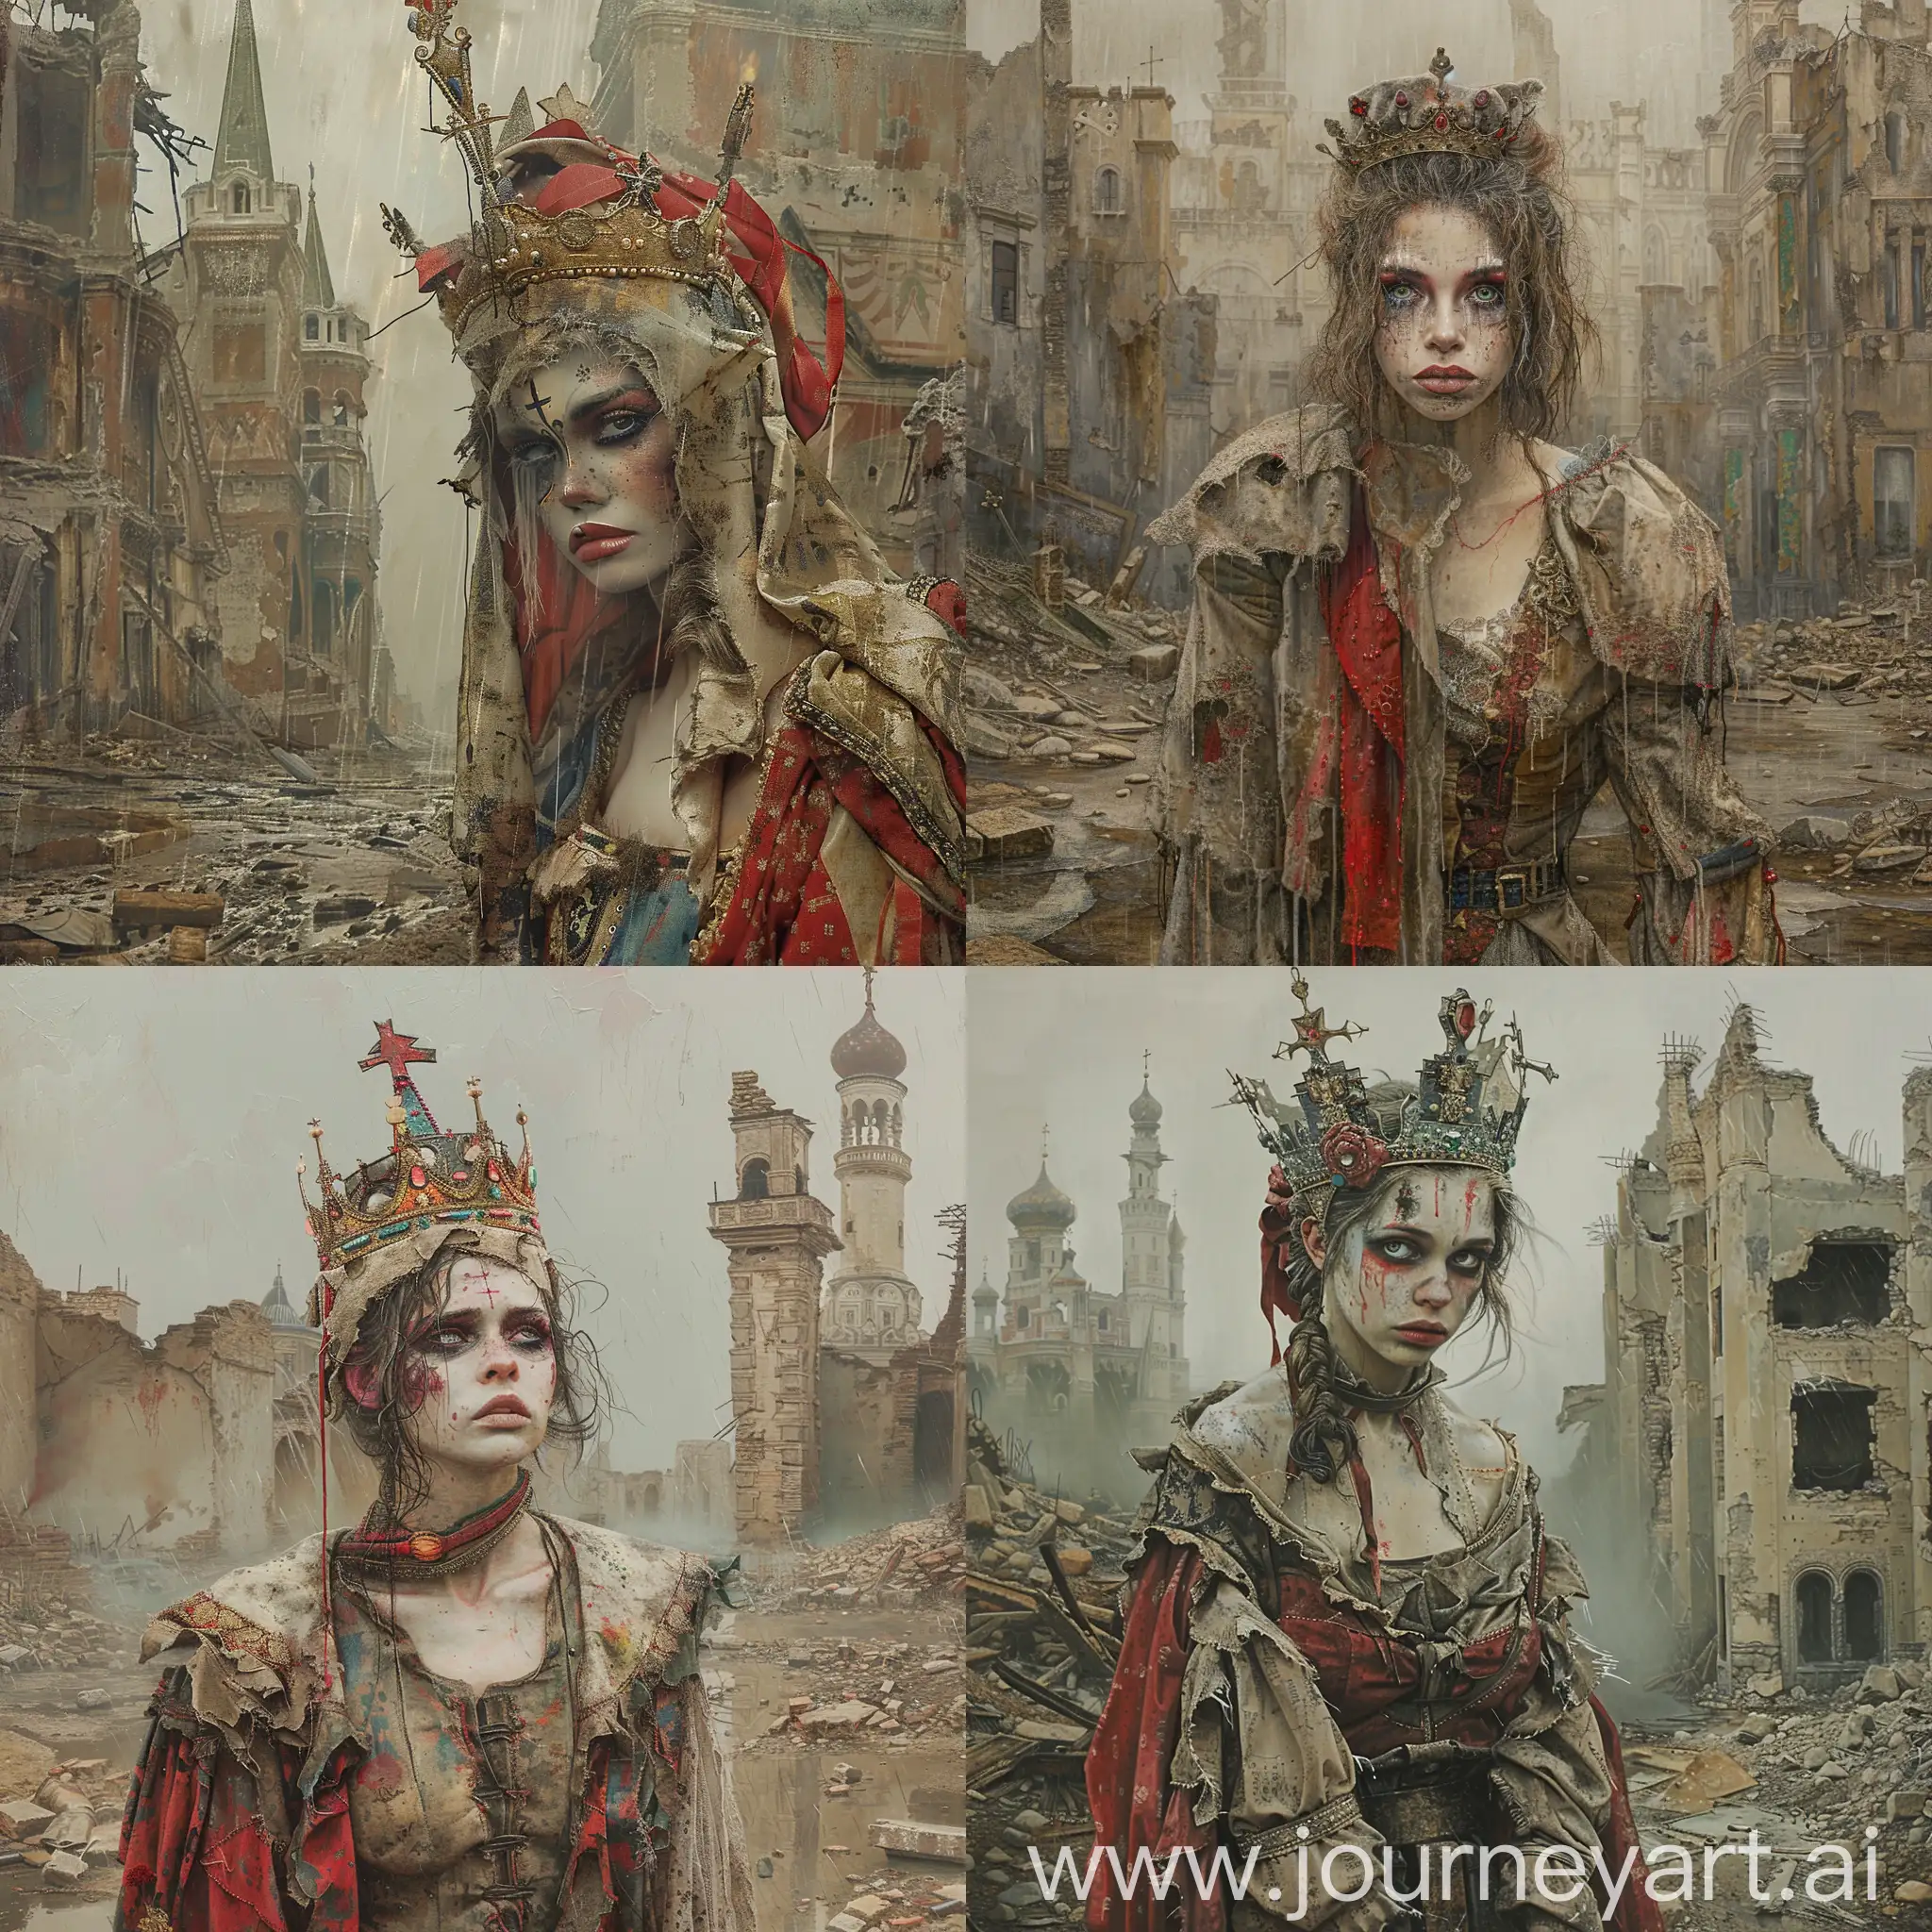  painting of woman in ruined city , in a medieval costume dirty and Torn, smuggled mascara and makeup , with a russian crown, skated or sad,  grandiose ruins, dark beige and red, victorian-era , colorful costumes, rain, fog, shallow depth of field, 